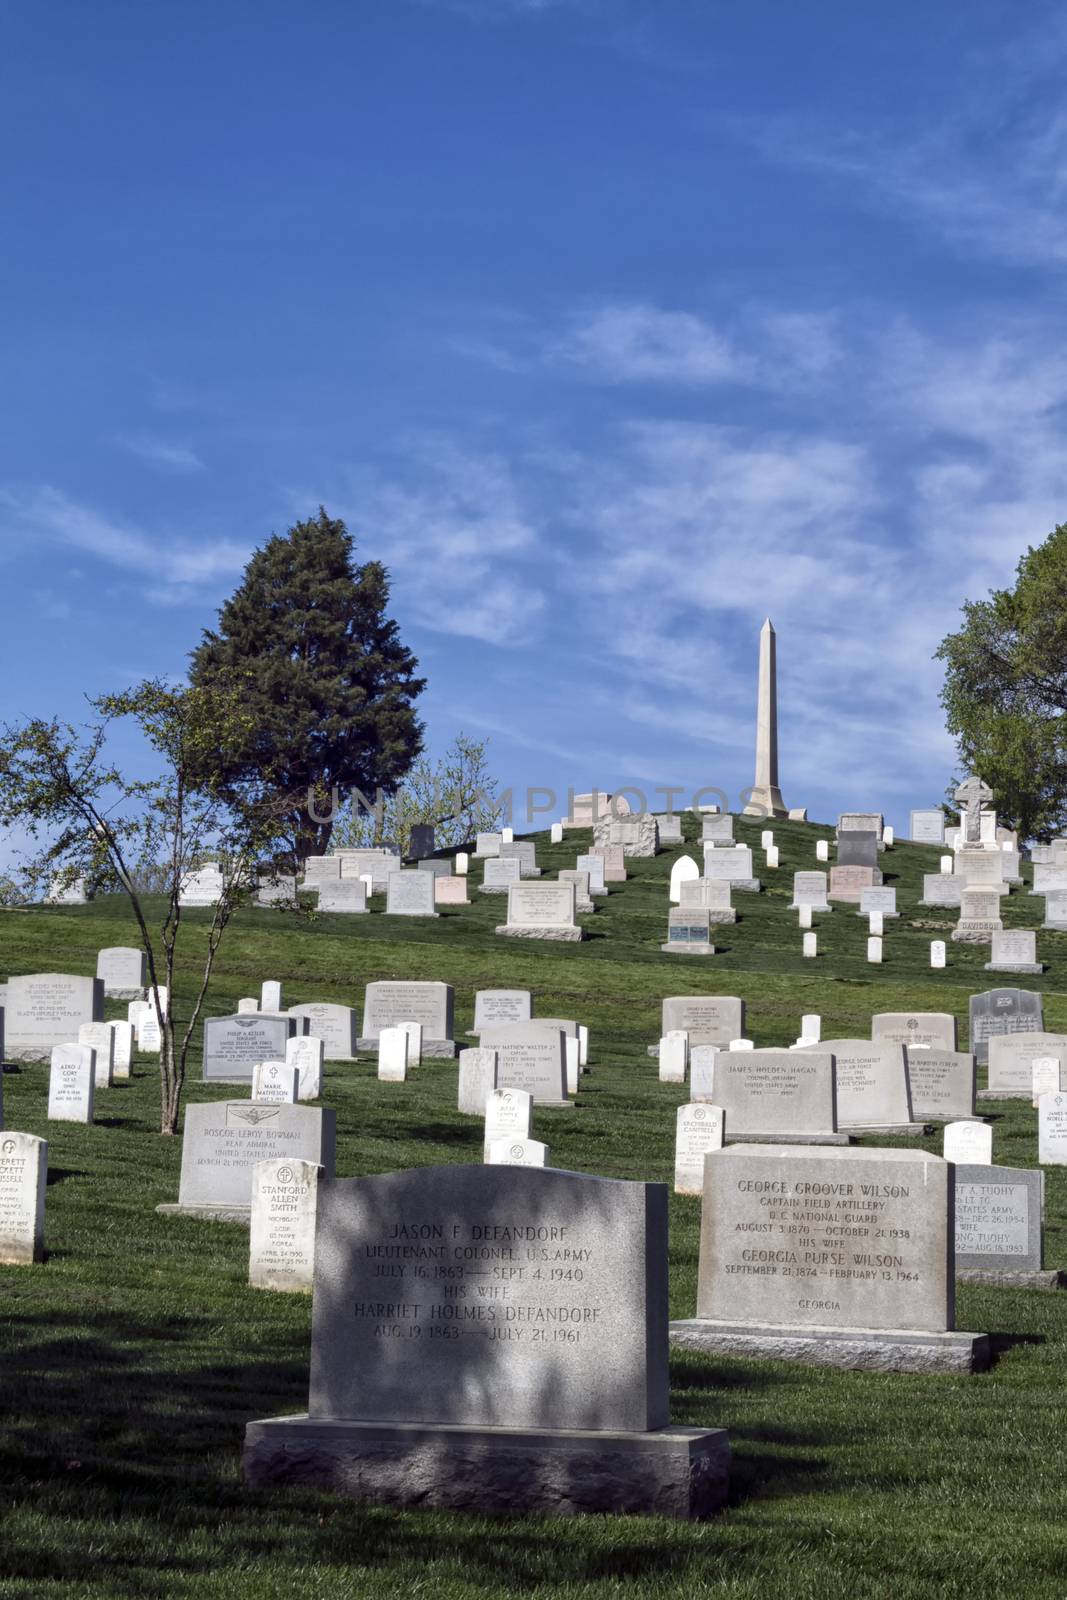 Graves at the Arlington Cemetery by Moonb007